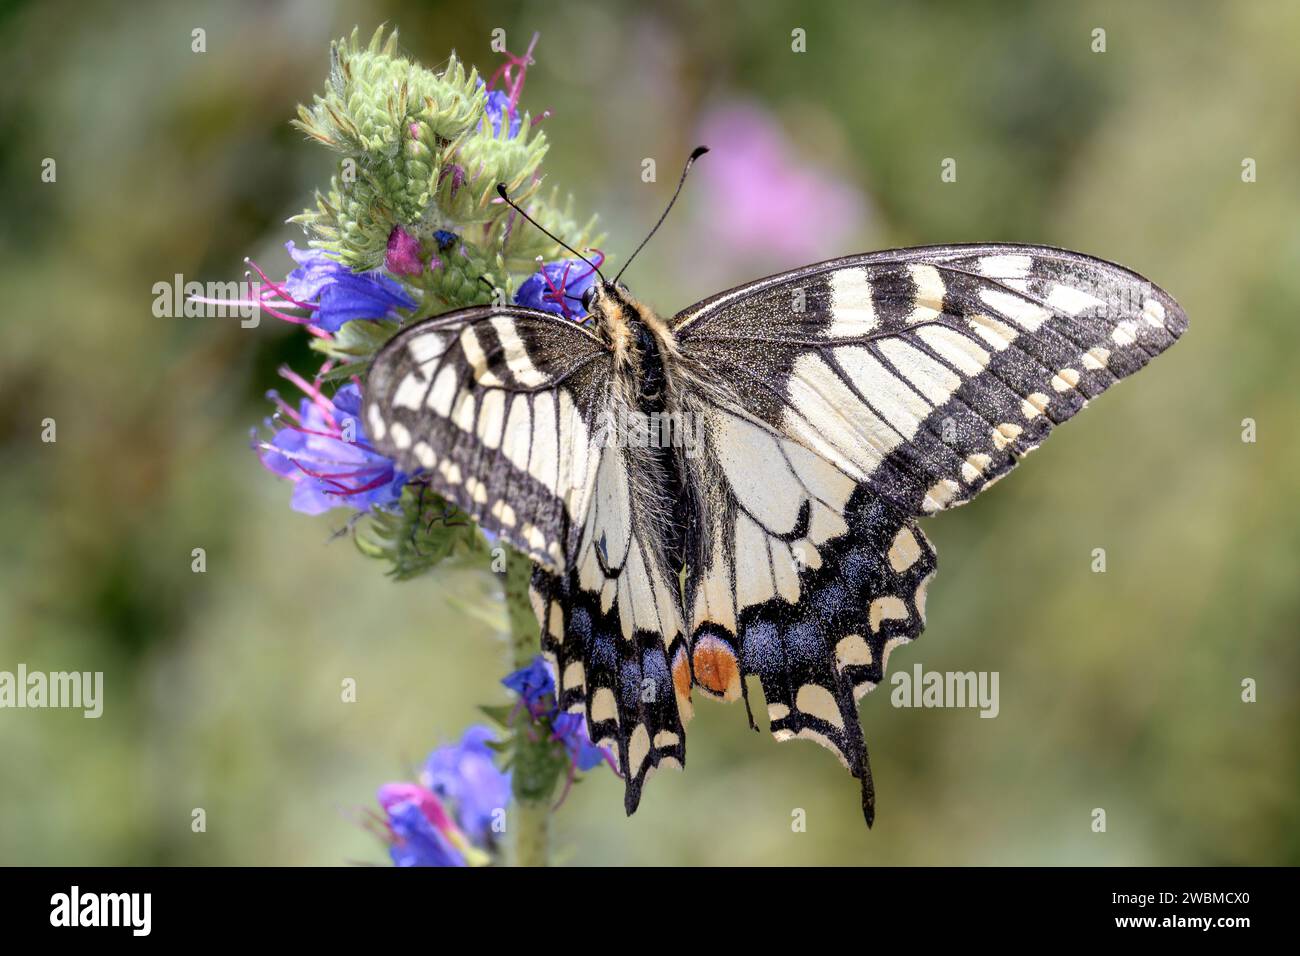 Swallowtail - Papilio Machaon - Also Called Grünader-Weißling Or Hecken-Weißling, On A Flower Of The Usual Natternkopf - Echium Vulgare Stock Photo